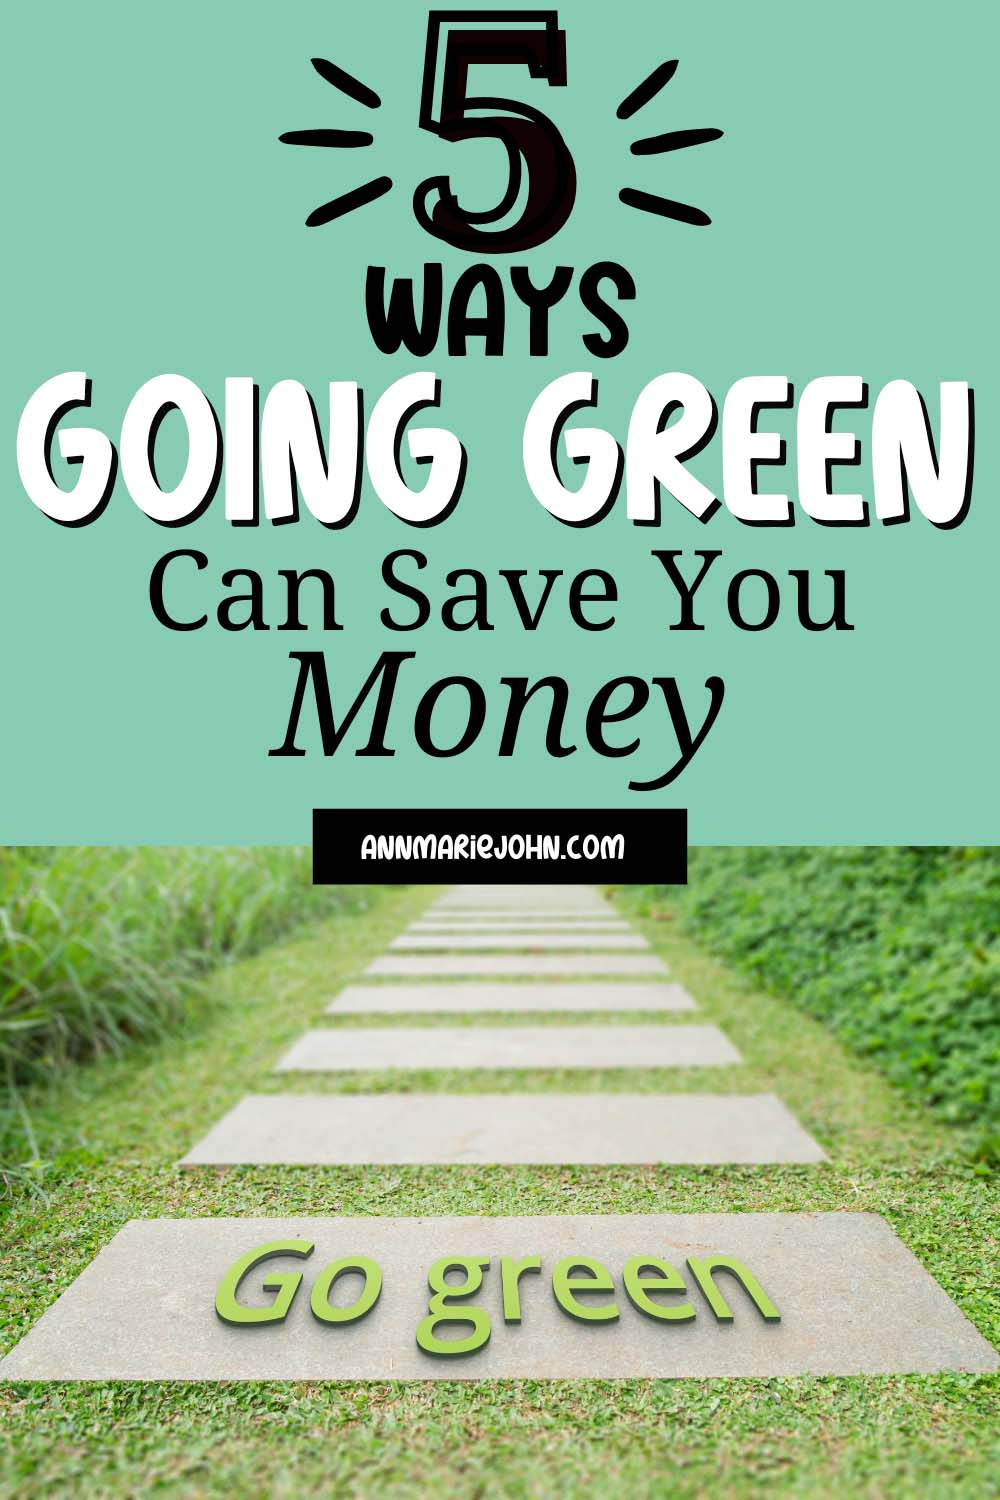 Five Ways Going Green Can Save You Money